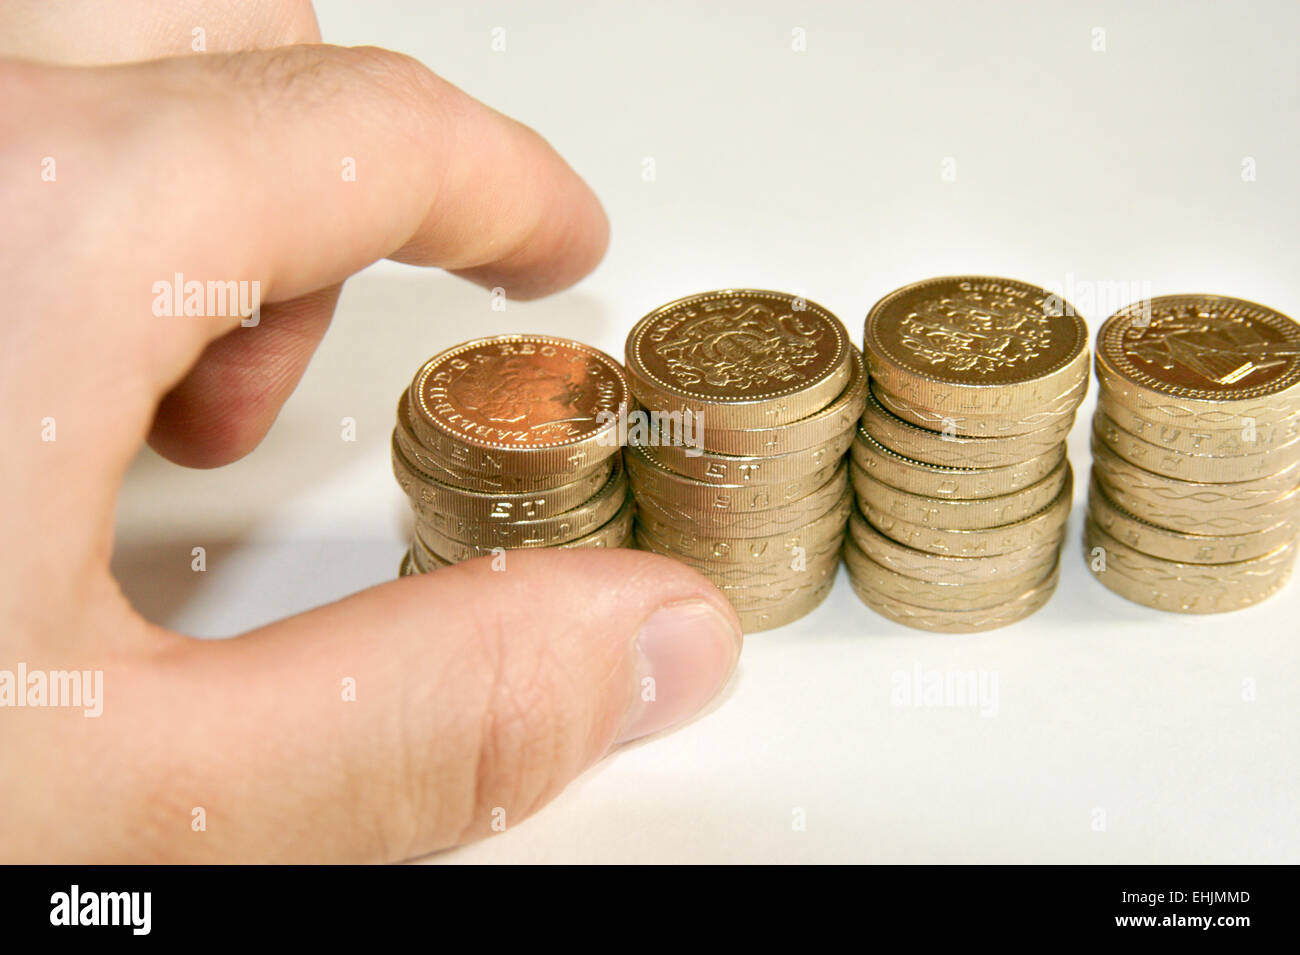 hand counting cash sterling pound coins Stock Photo